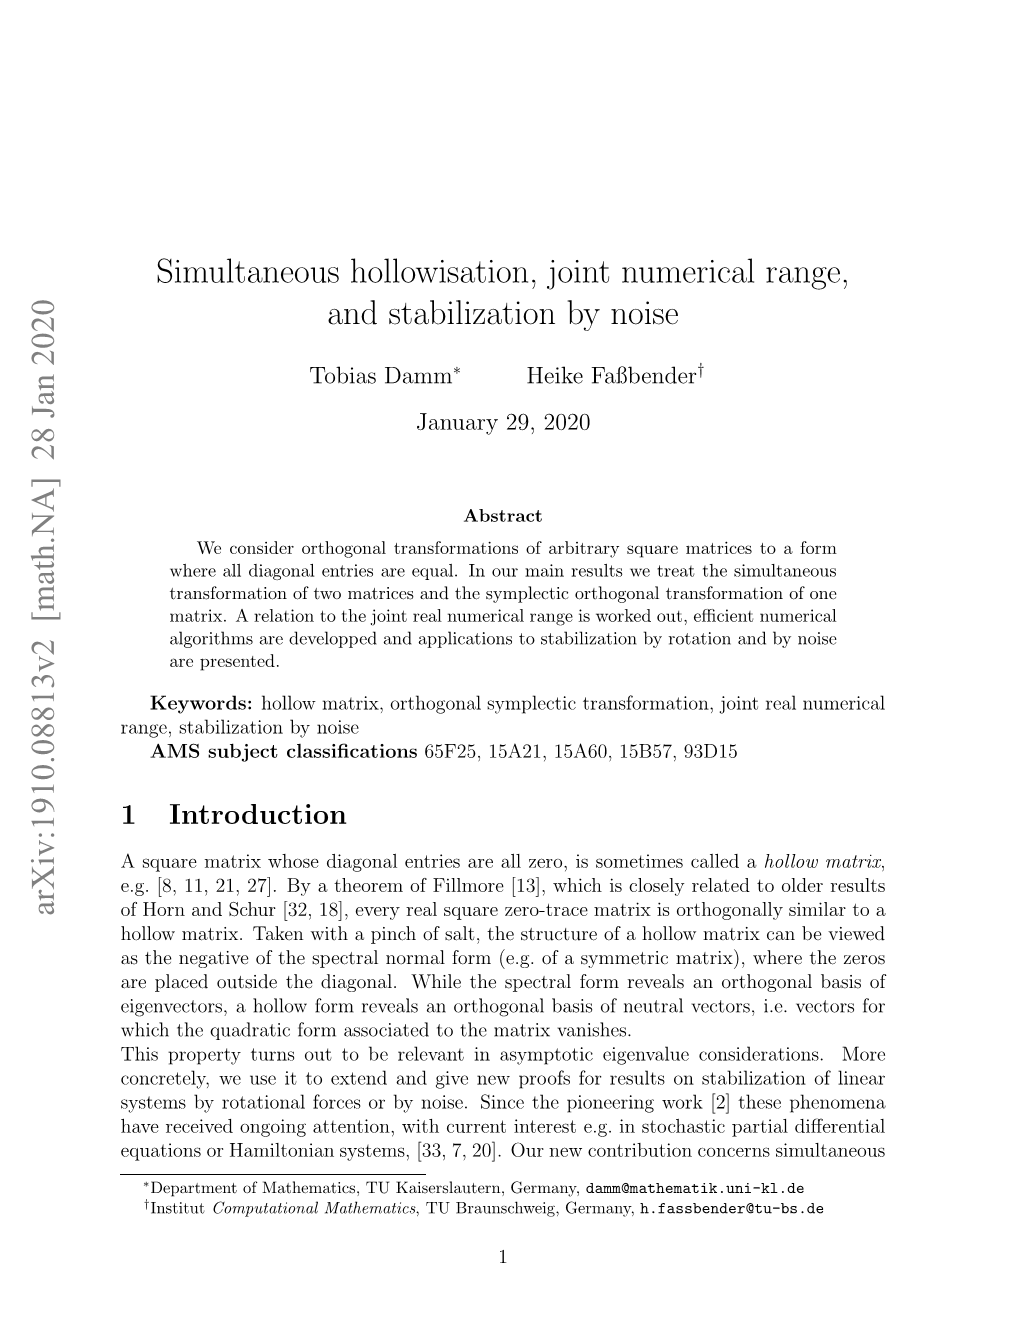 Simultaneous Hollowisation, Joint Numerical Range, and Stabilization